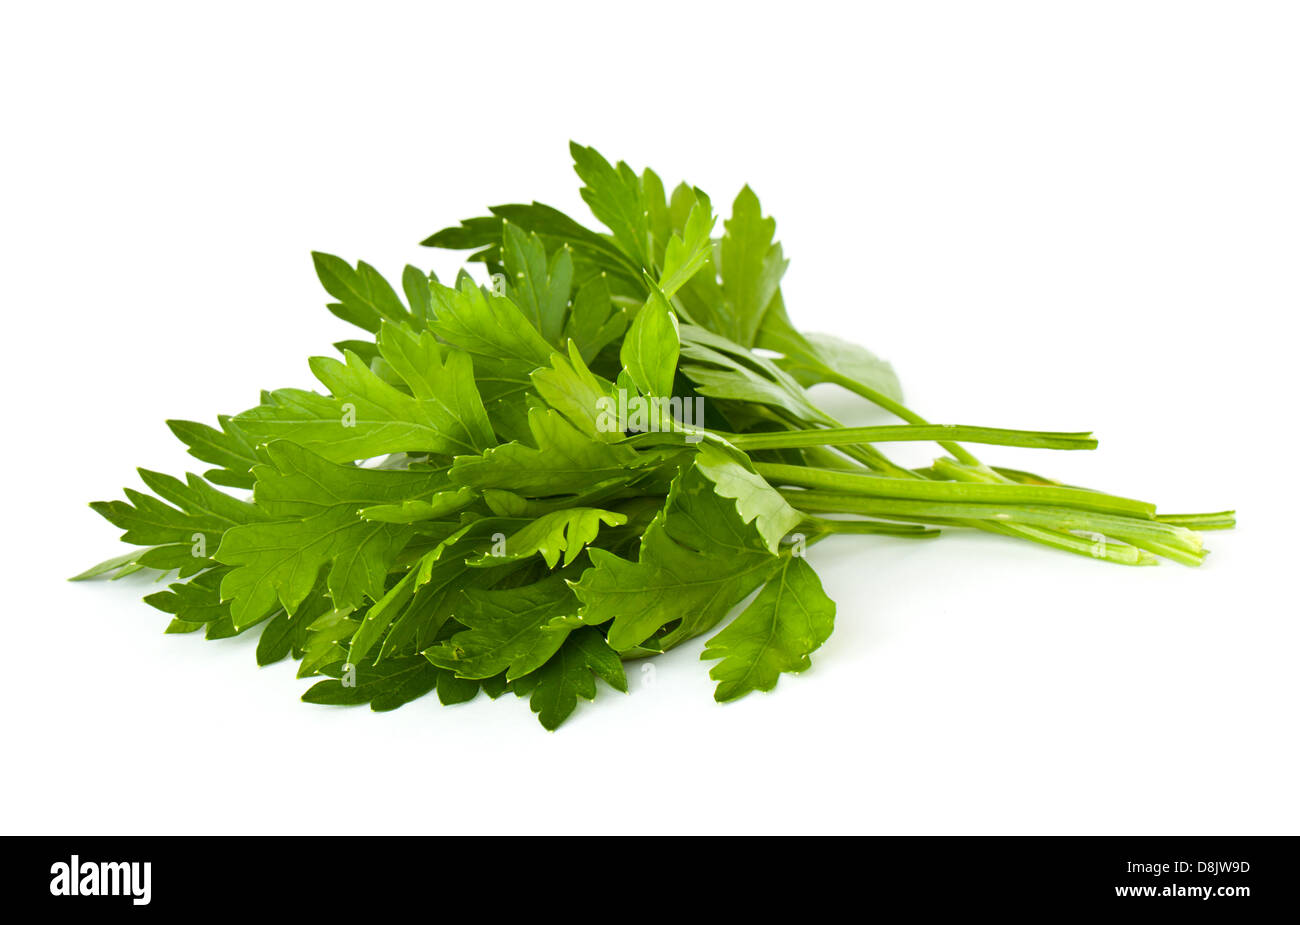 https://c8.alamy.com/comp/D8JW9D/leaves-of-parsley-isolated-on-white-background-D8JW9D.jpg